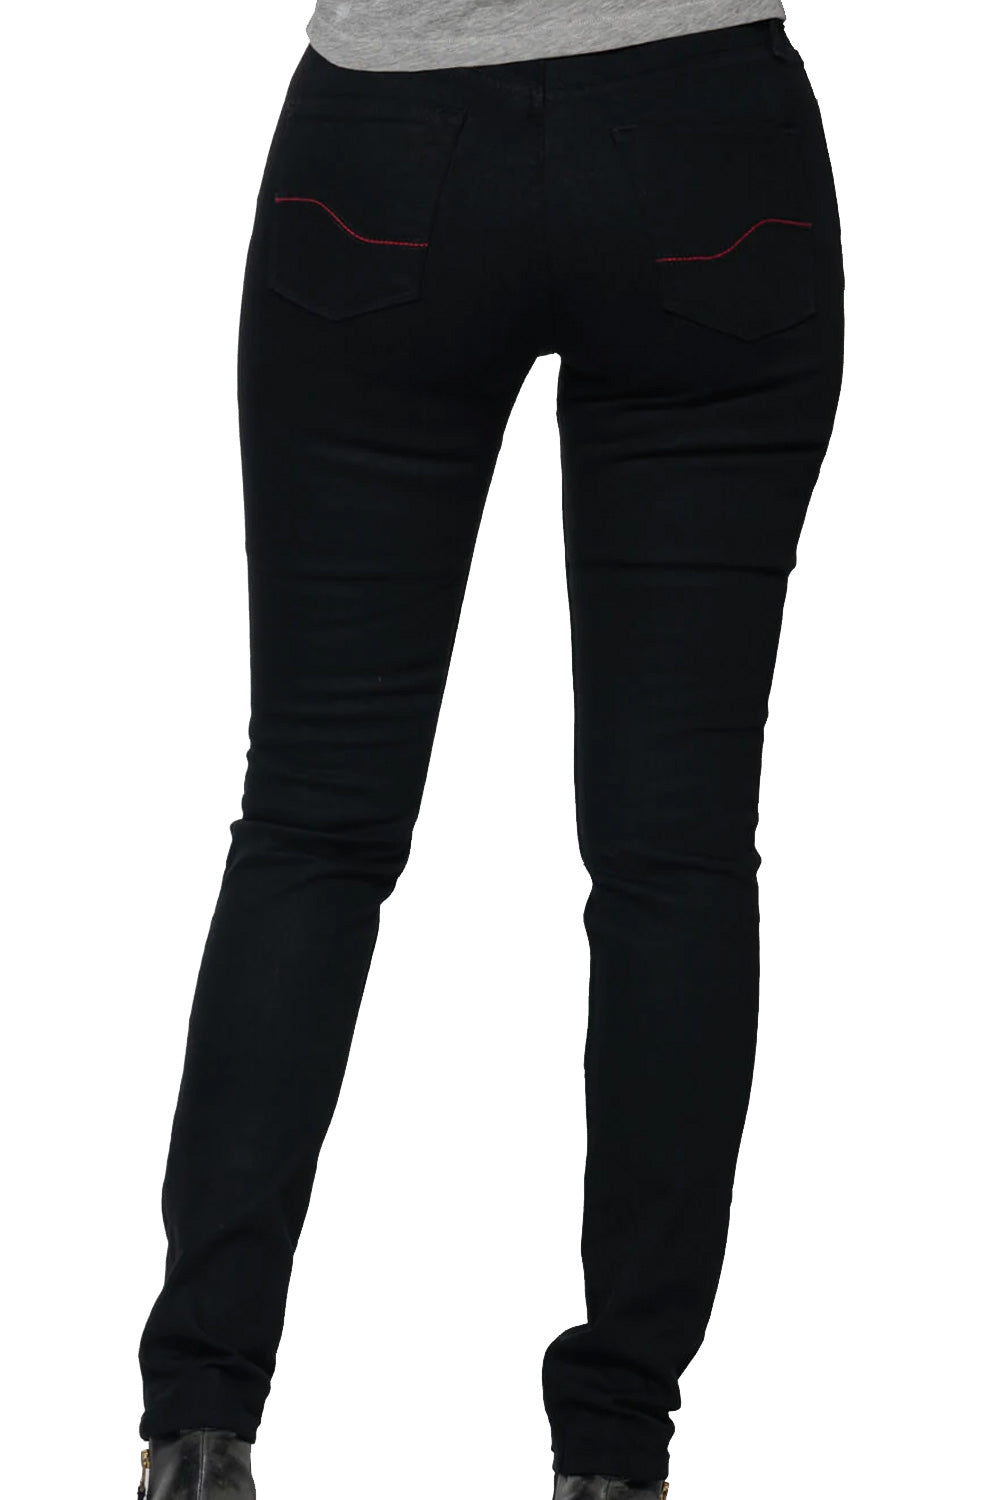 Womens Black Mesh Tight Top Pencil Jeans Motorcycle Moto Protector Pants  From Pubao, $87.72